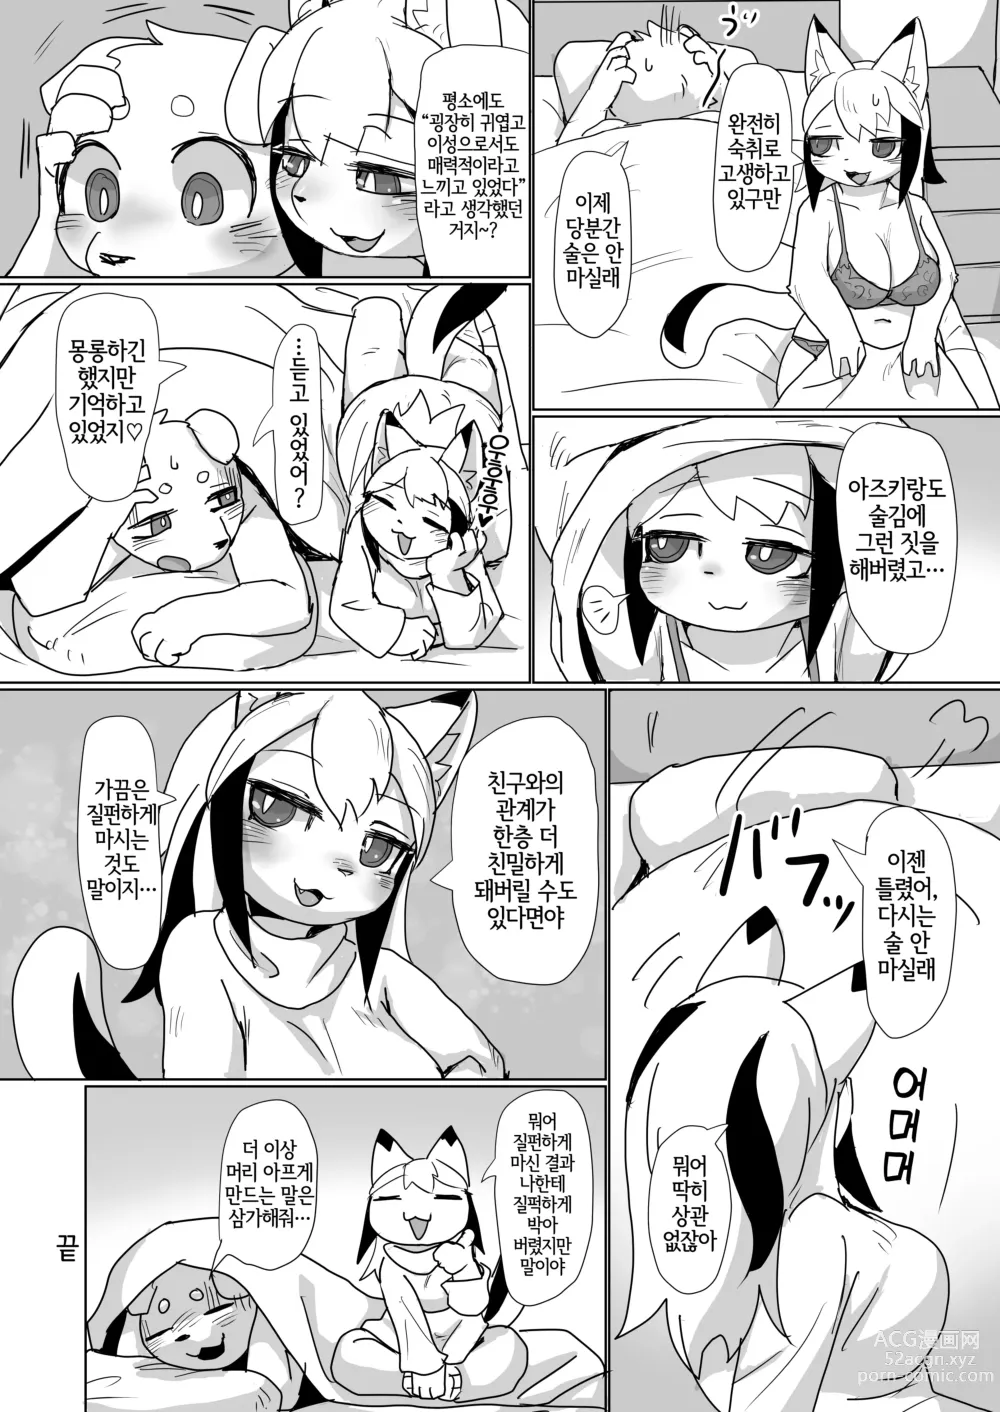 Page 19 of doujinshi 오늘 밤 평소의 술친구와